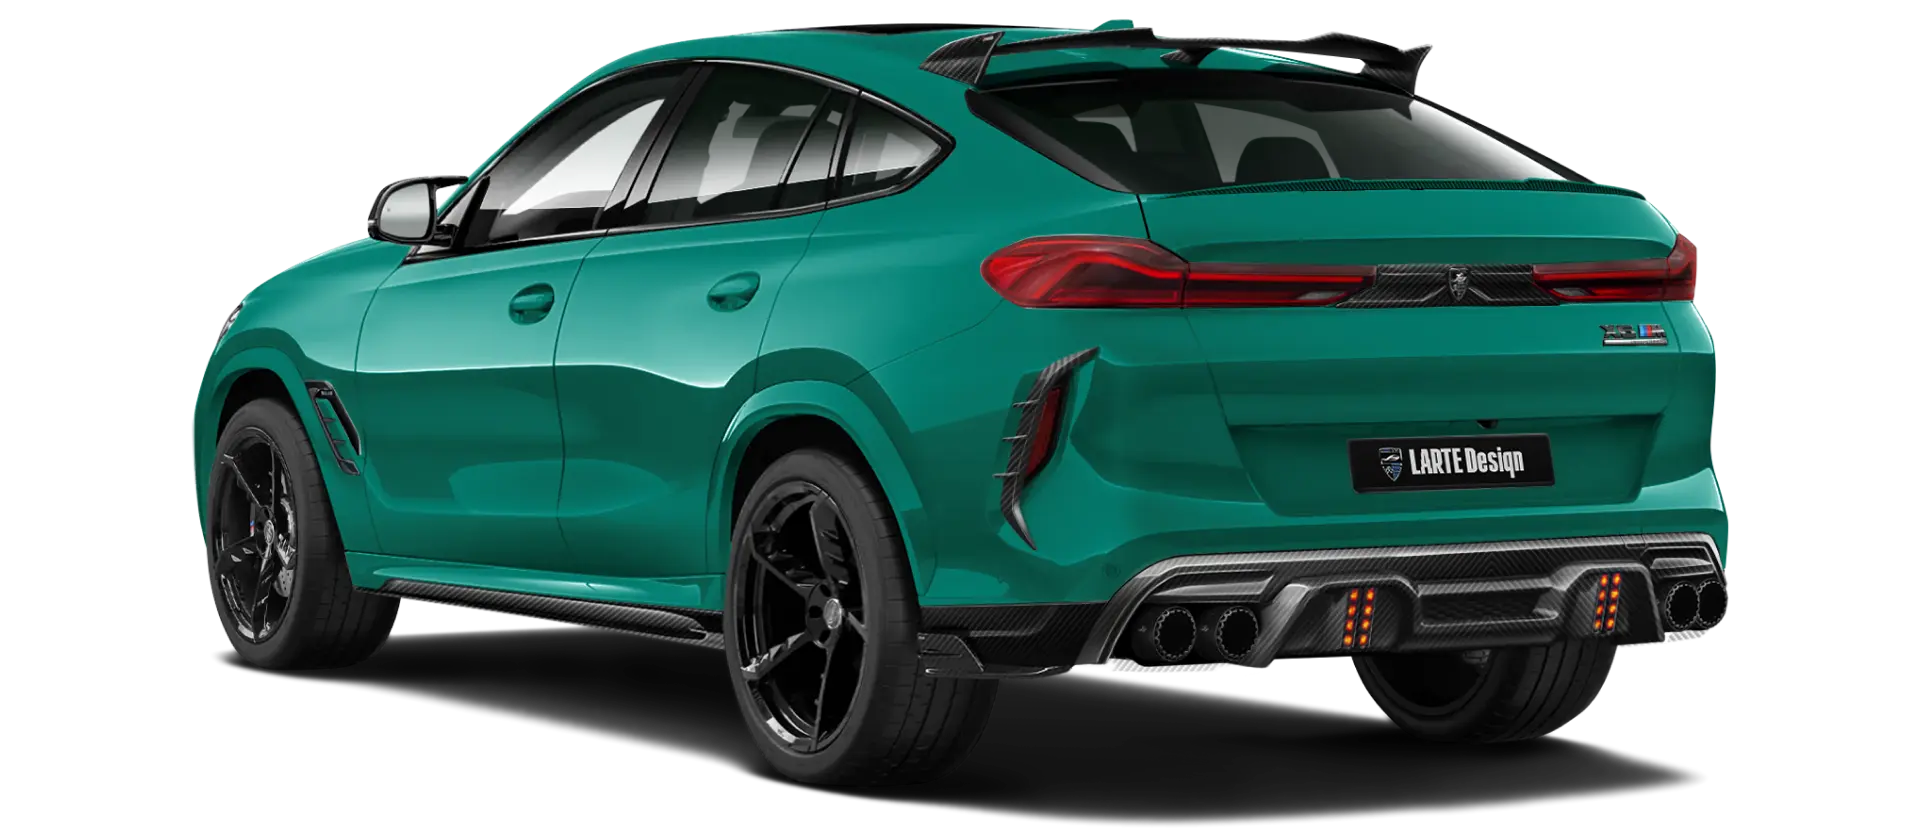 BMW X6M F96 LCI 2023 with carbon body kit: back view shown in Isle Of Man